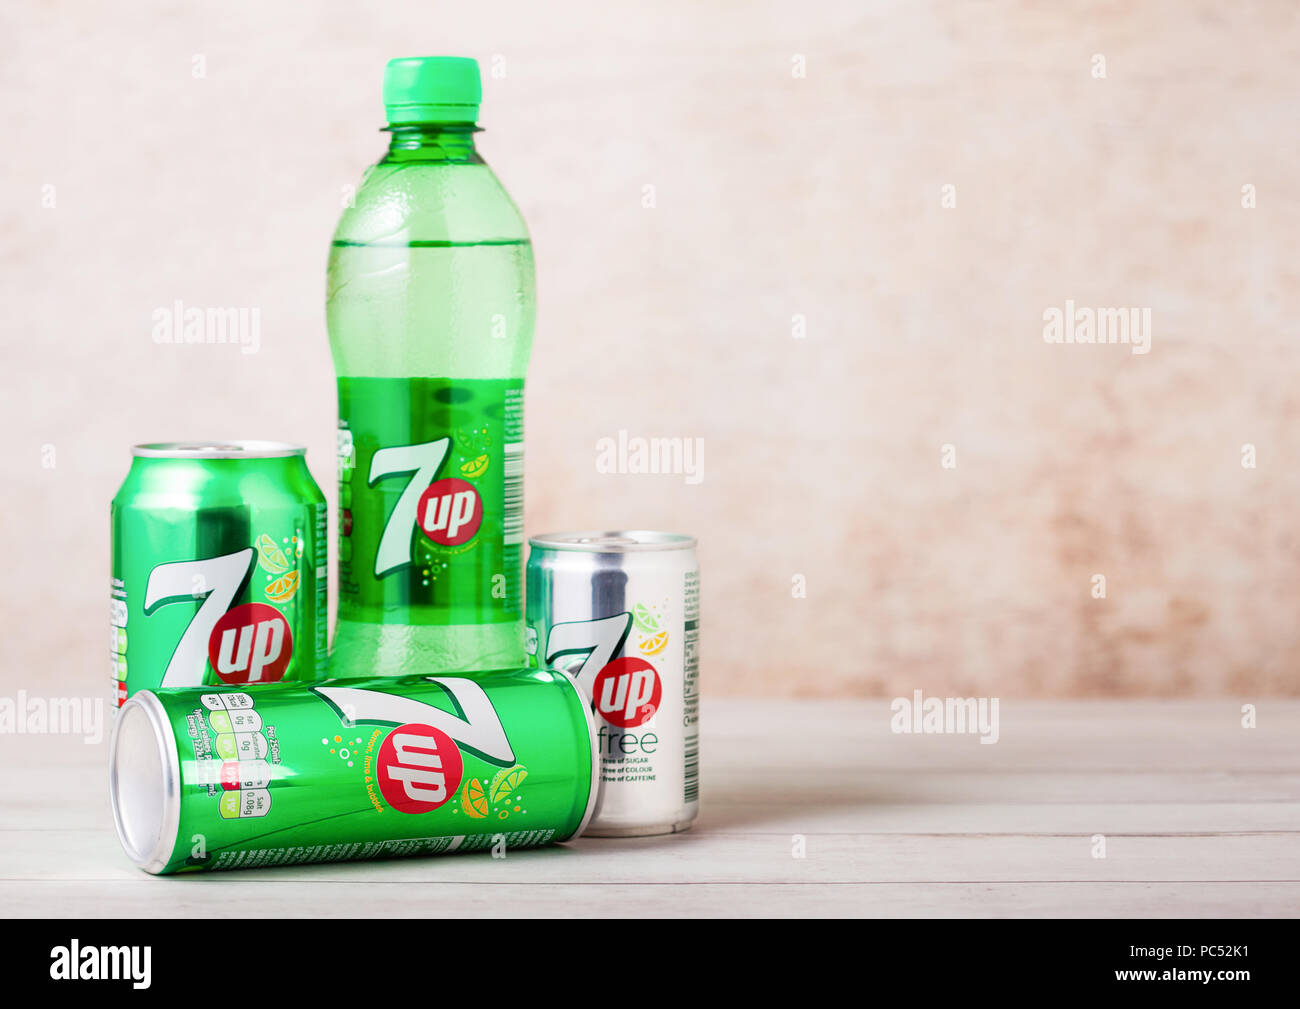 LONDON, UK - AUGUST 03, 2018: Plastic bottle and aluminium cans of 7UP citrus soda drink on wood. Stock Photo